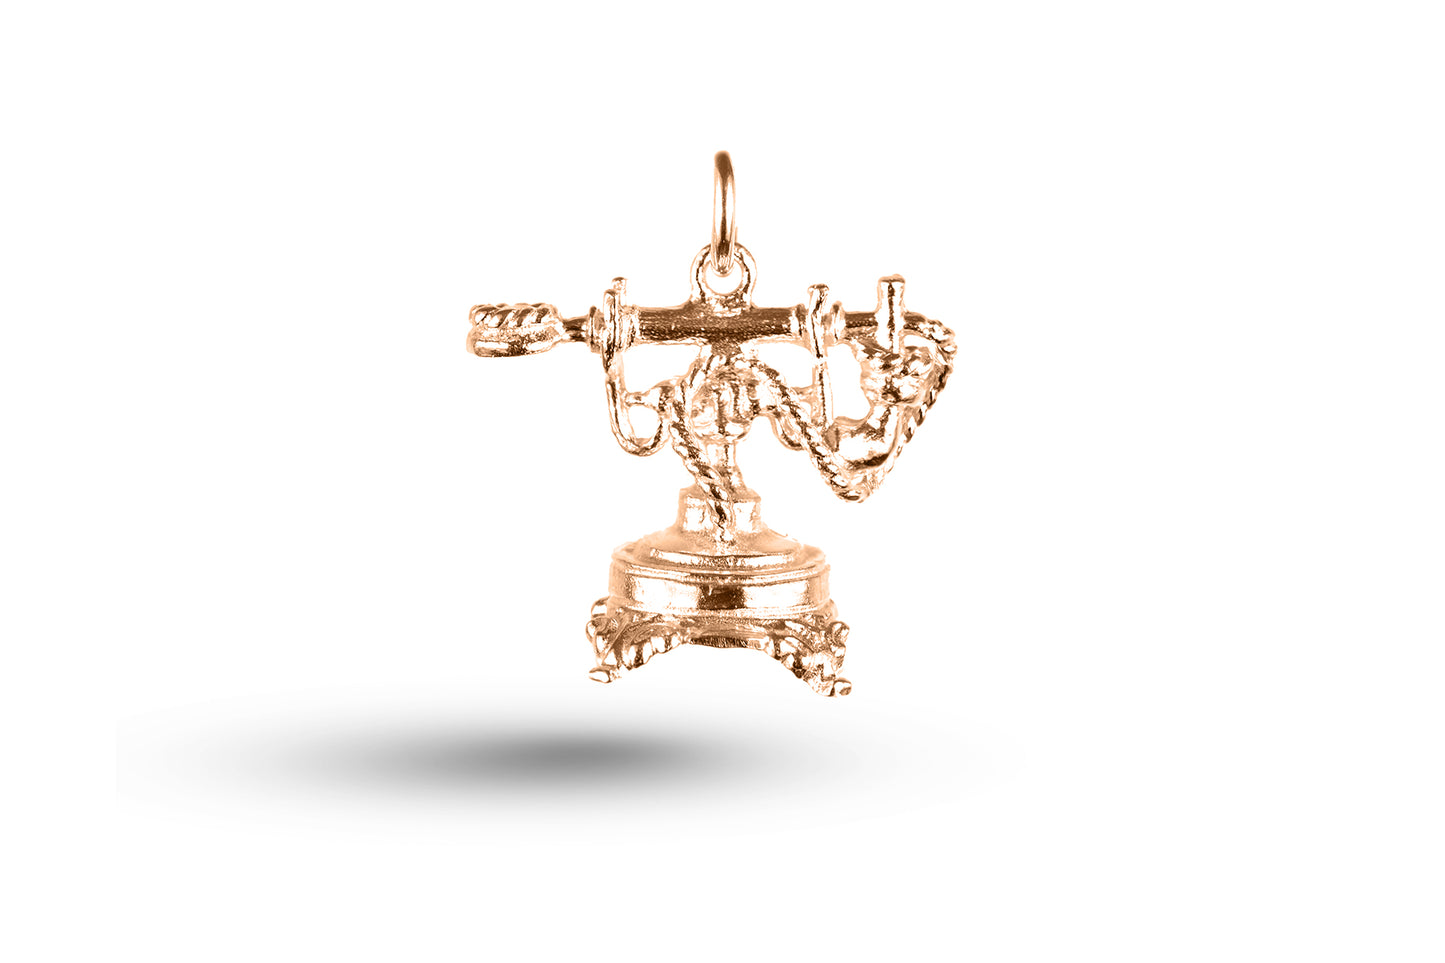 Rose gold Old Fashioned Candlestick Telephone charm.